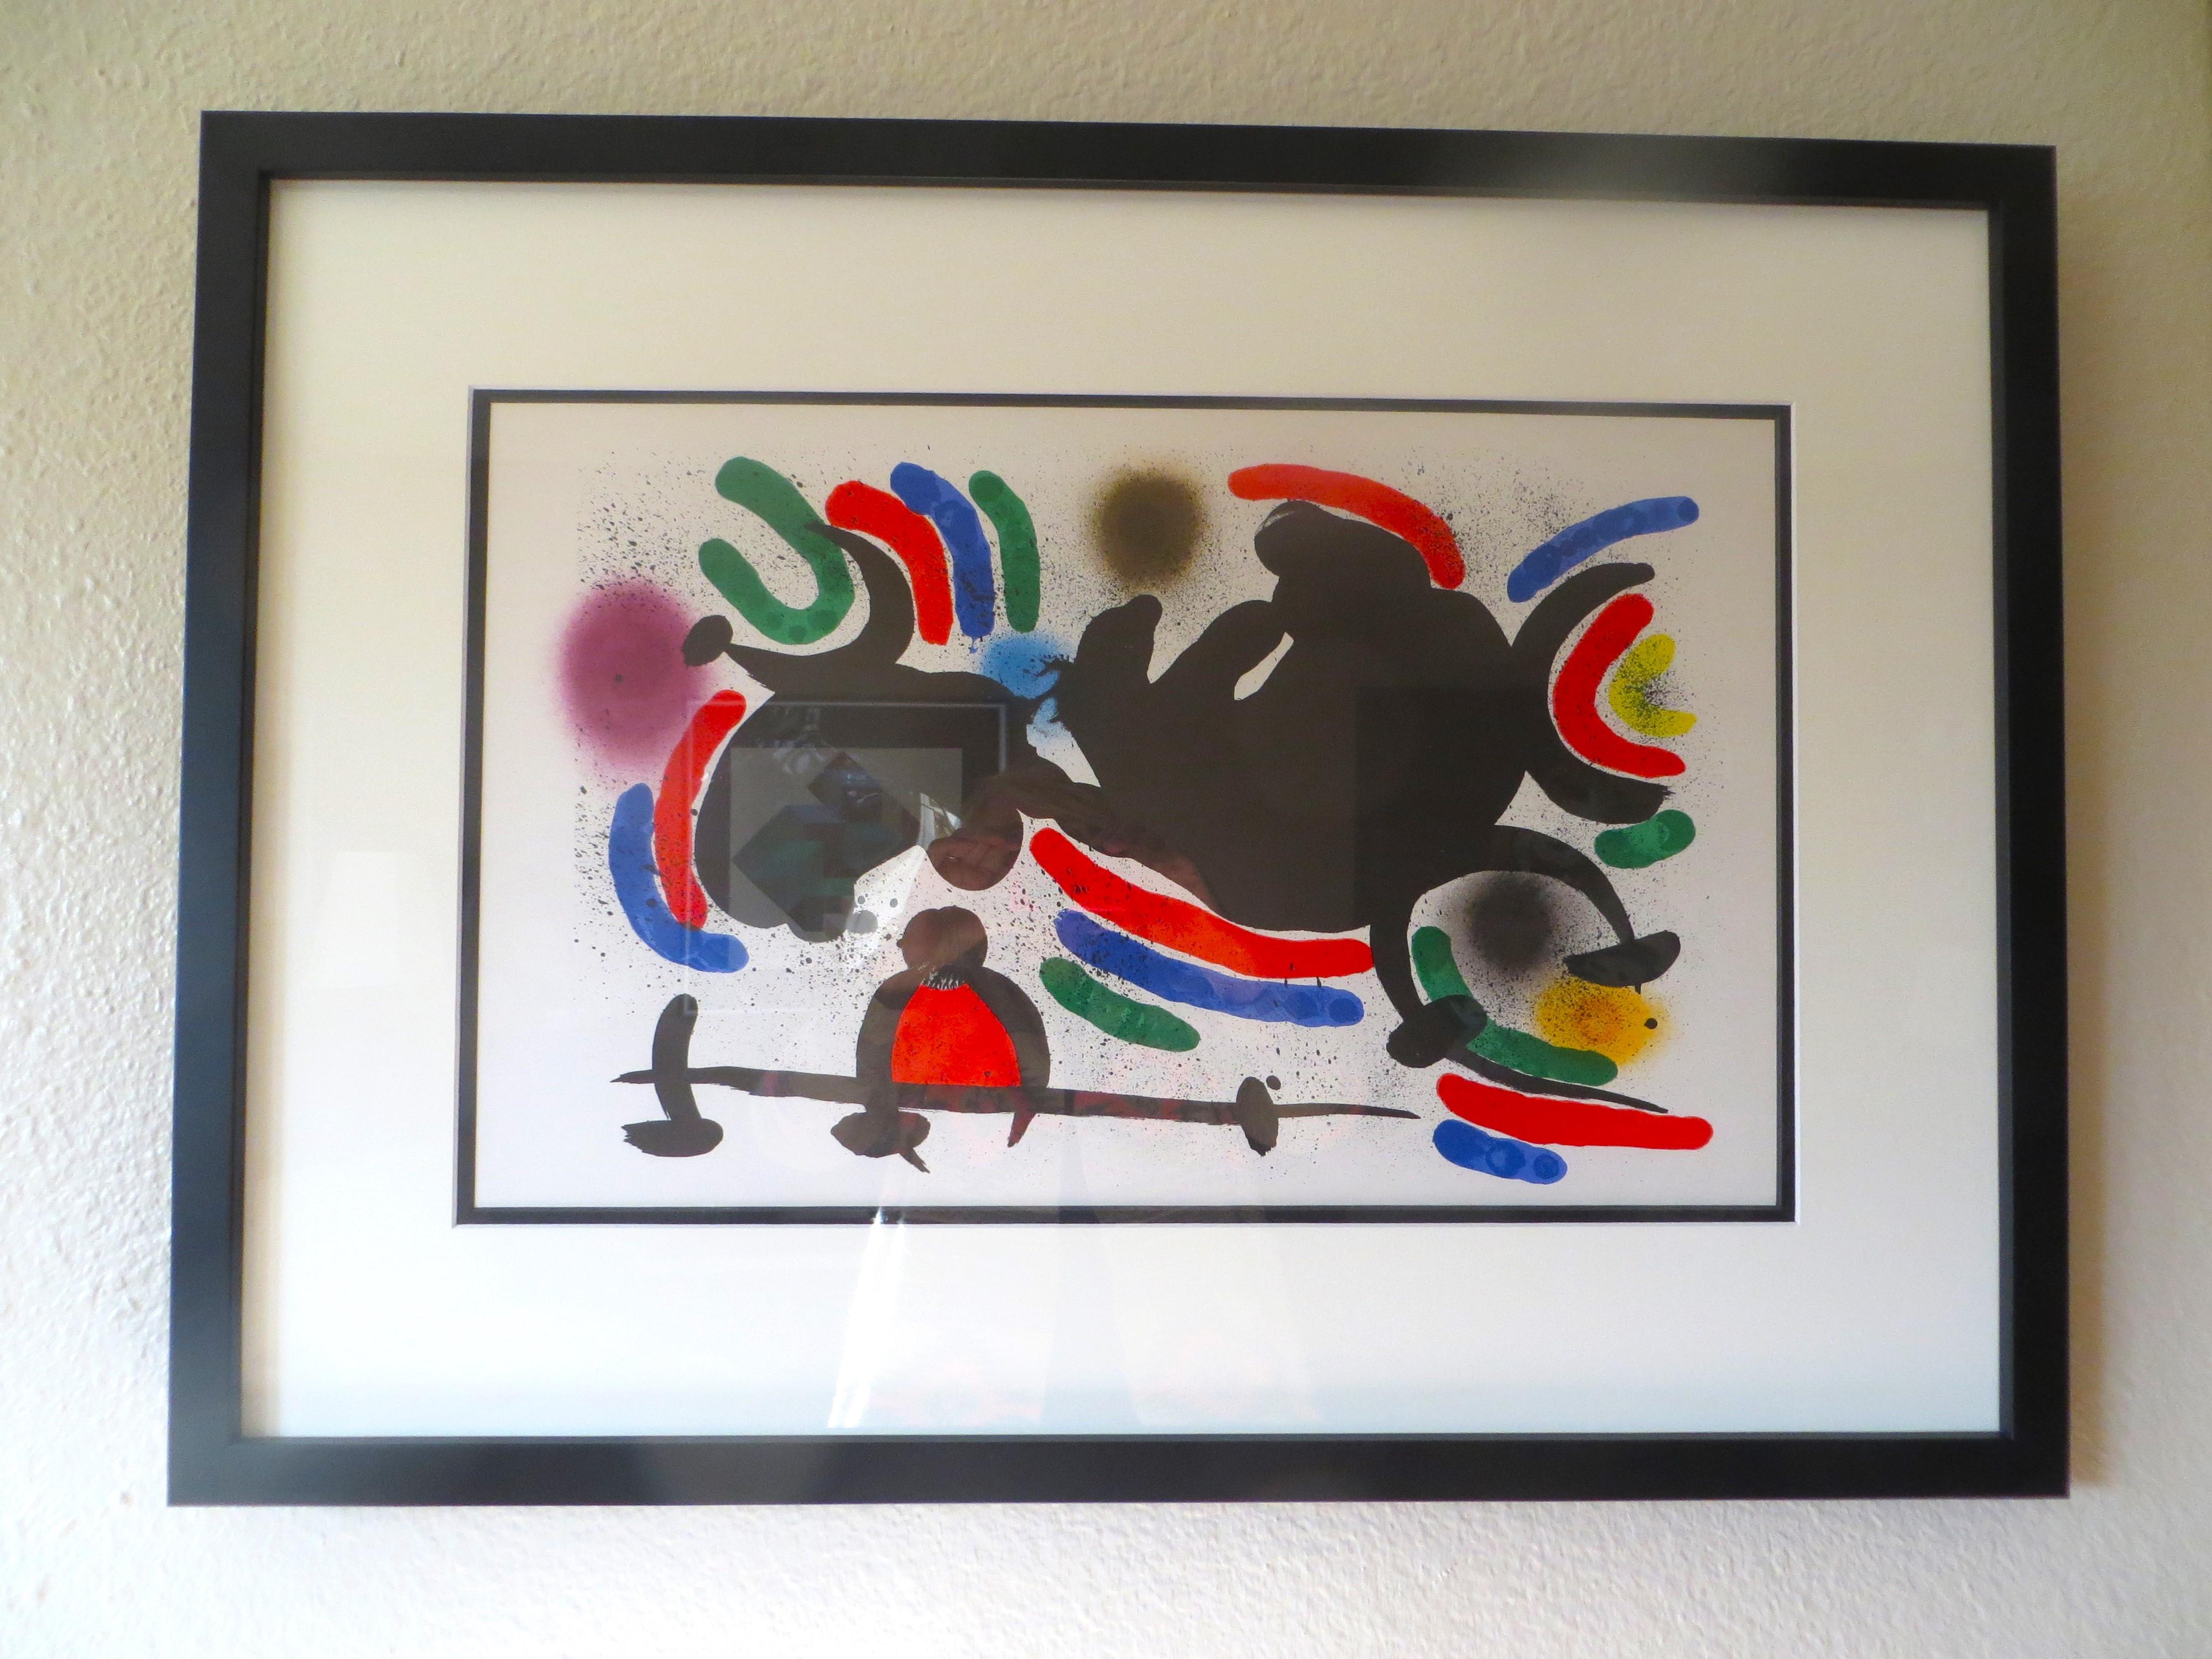 (after) Joan Miró Abstract Print - Abstract Lithograph I, Maegh Editor, Derriere le Miroir, 1978